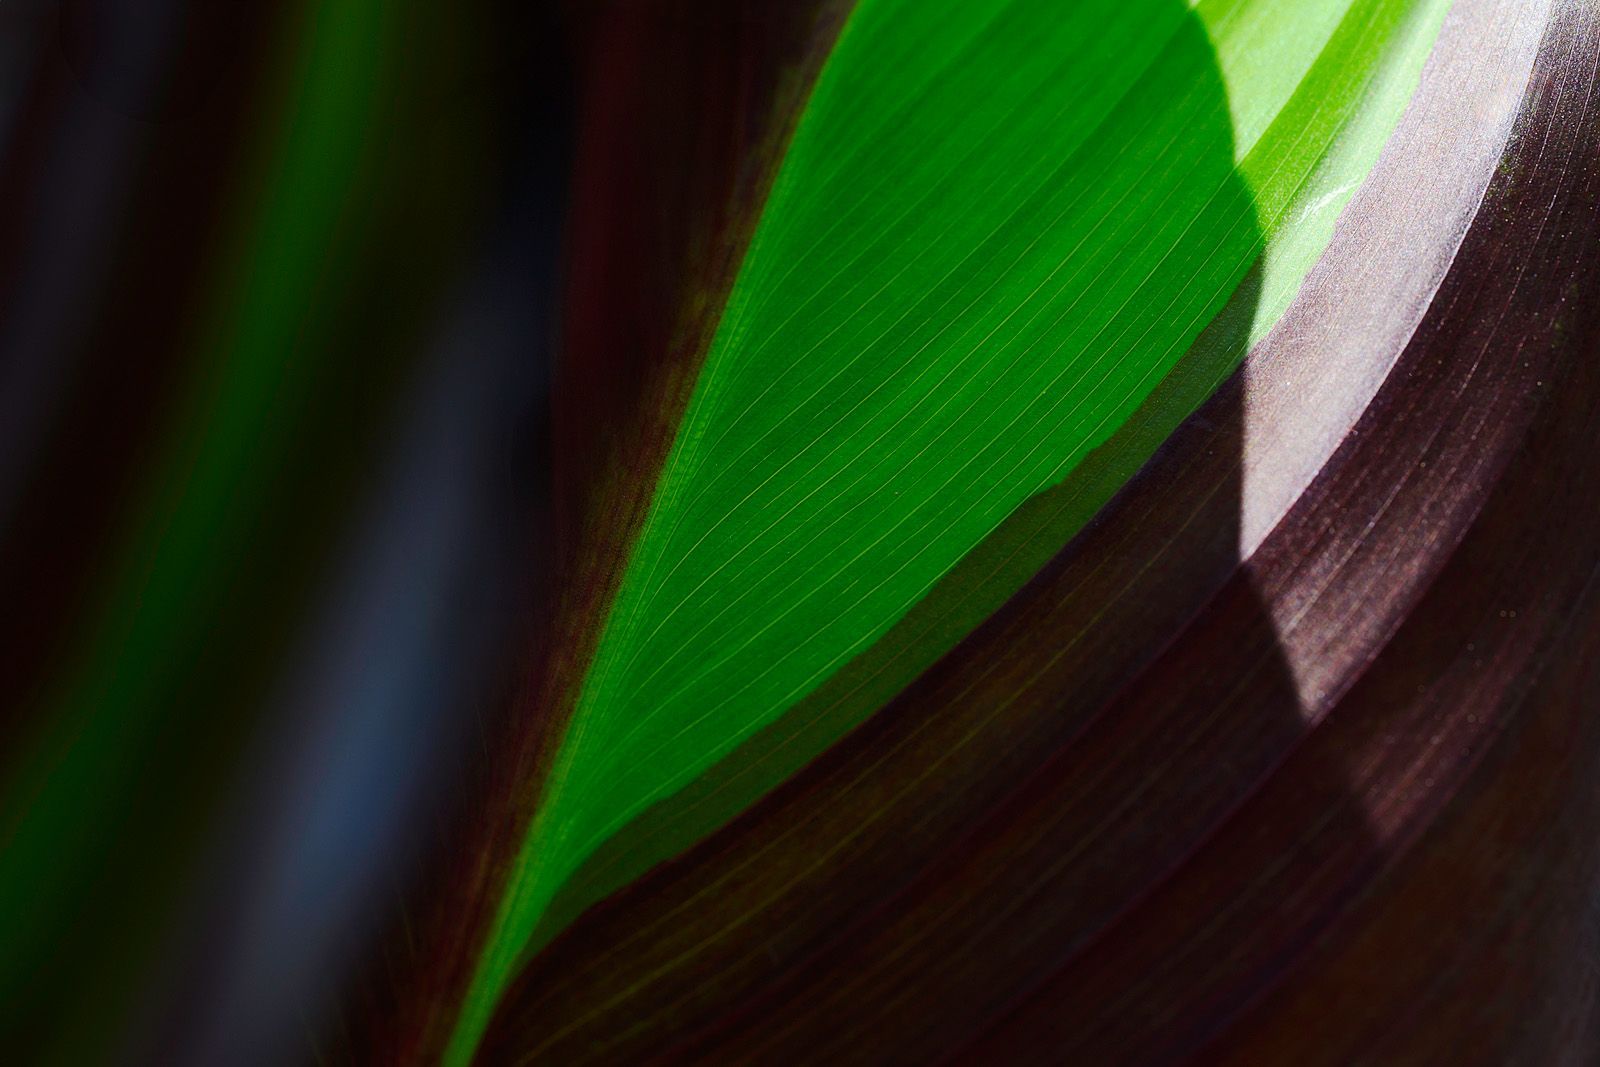 Abstraction of a plant leaf